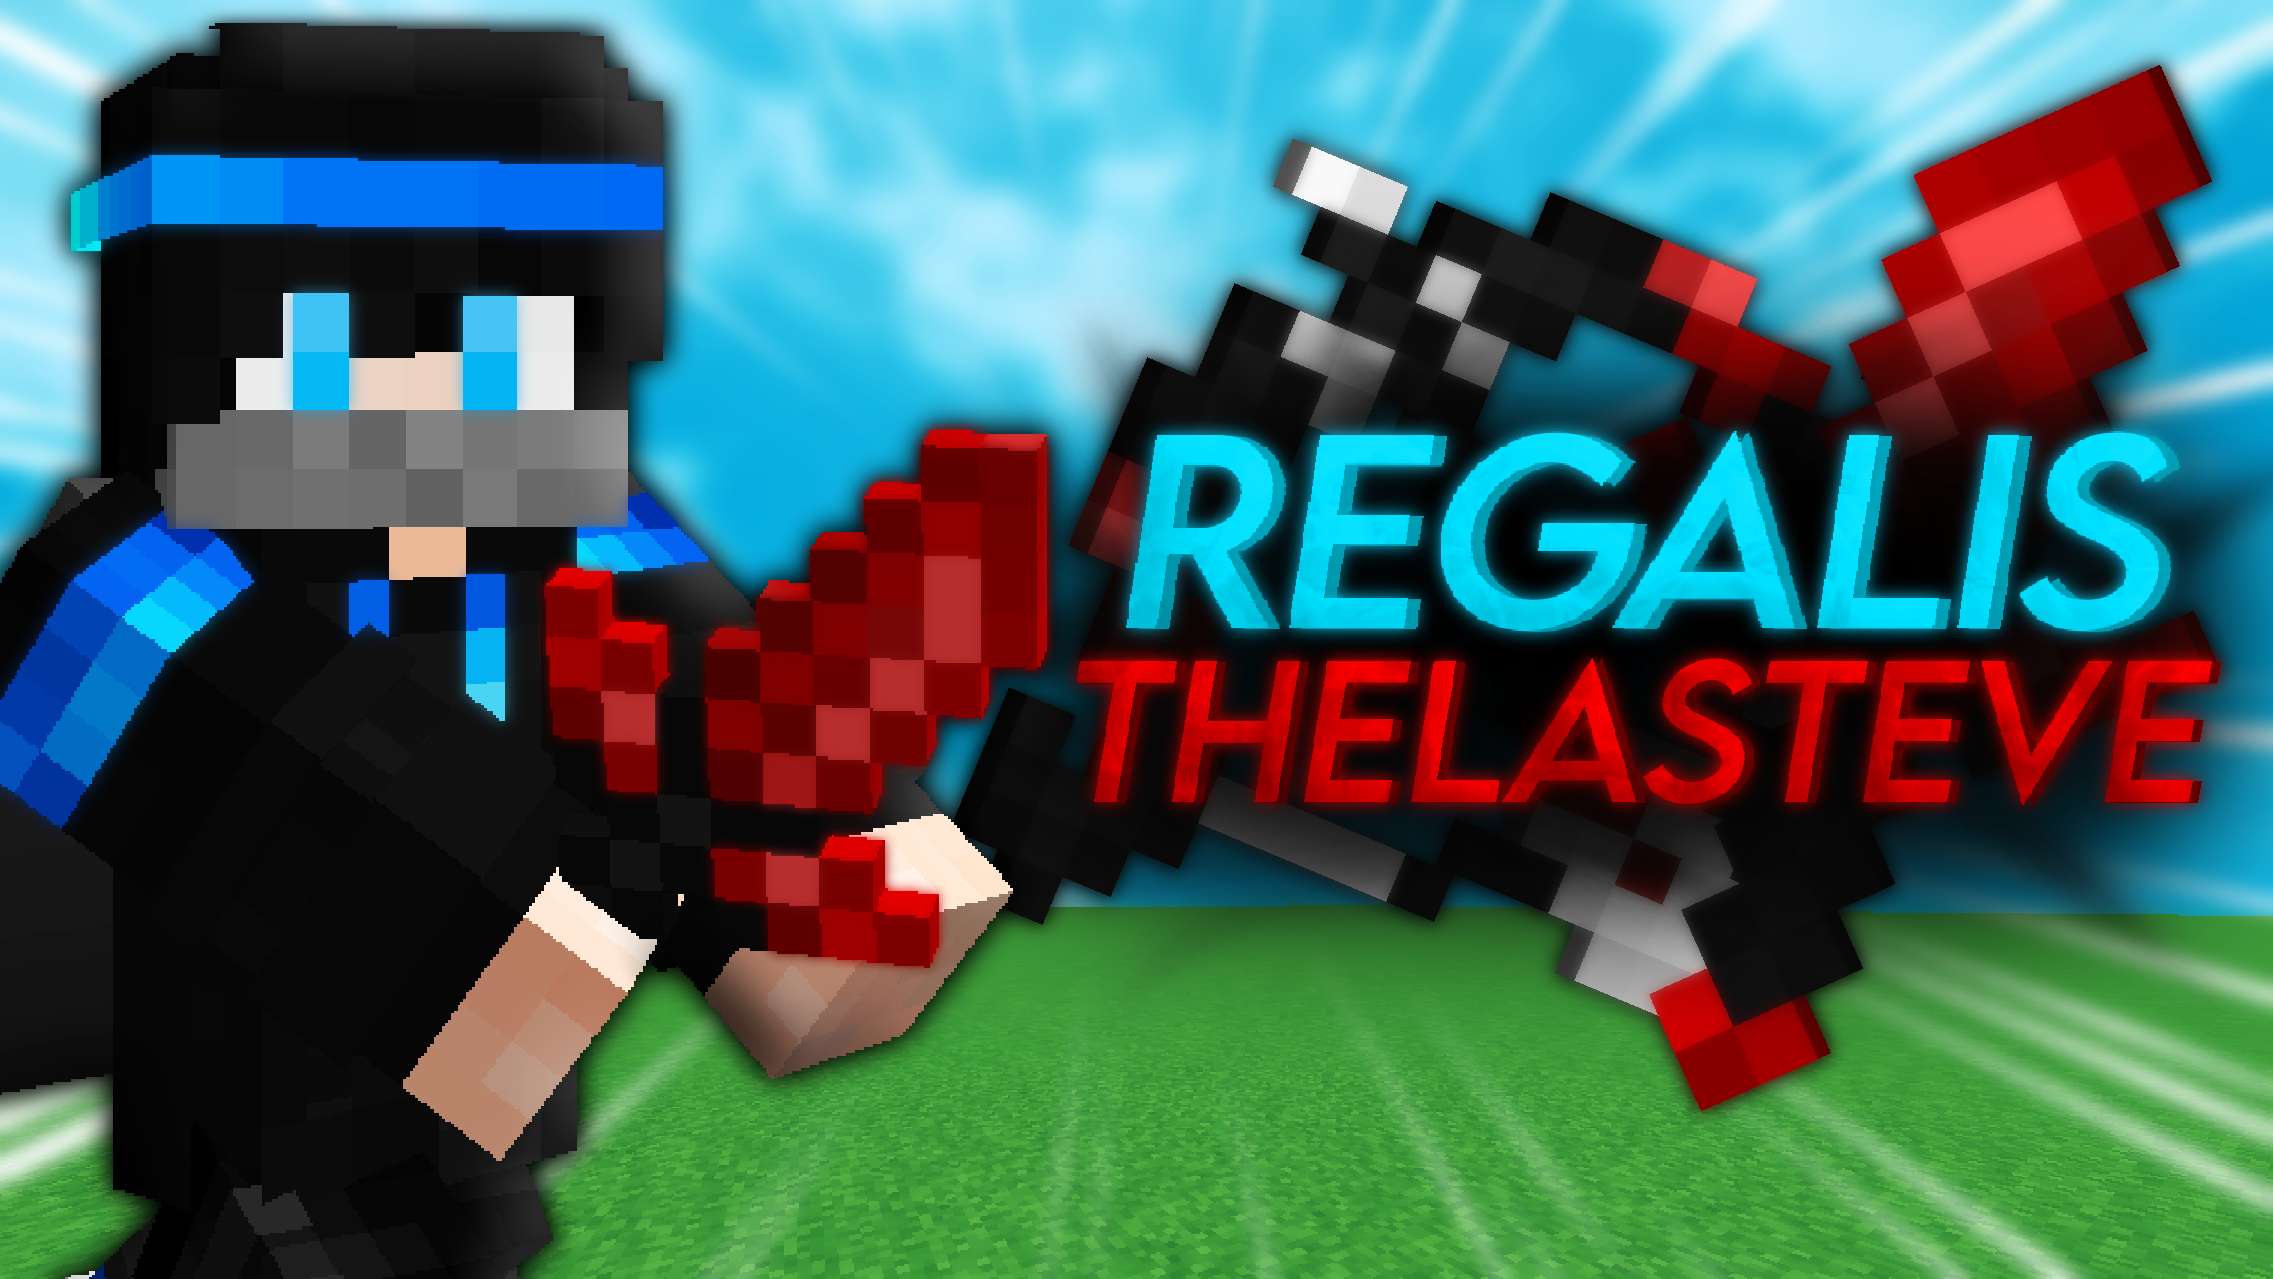 REGALIS - THELASTEVE [LONG SWORDS] 16x by Mqryo on PvPRP